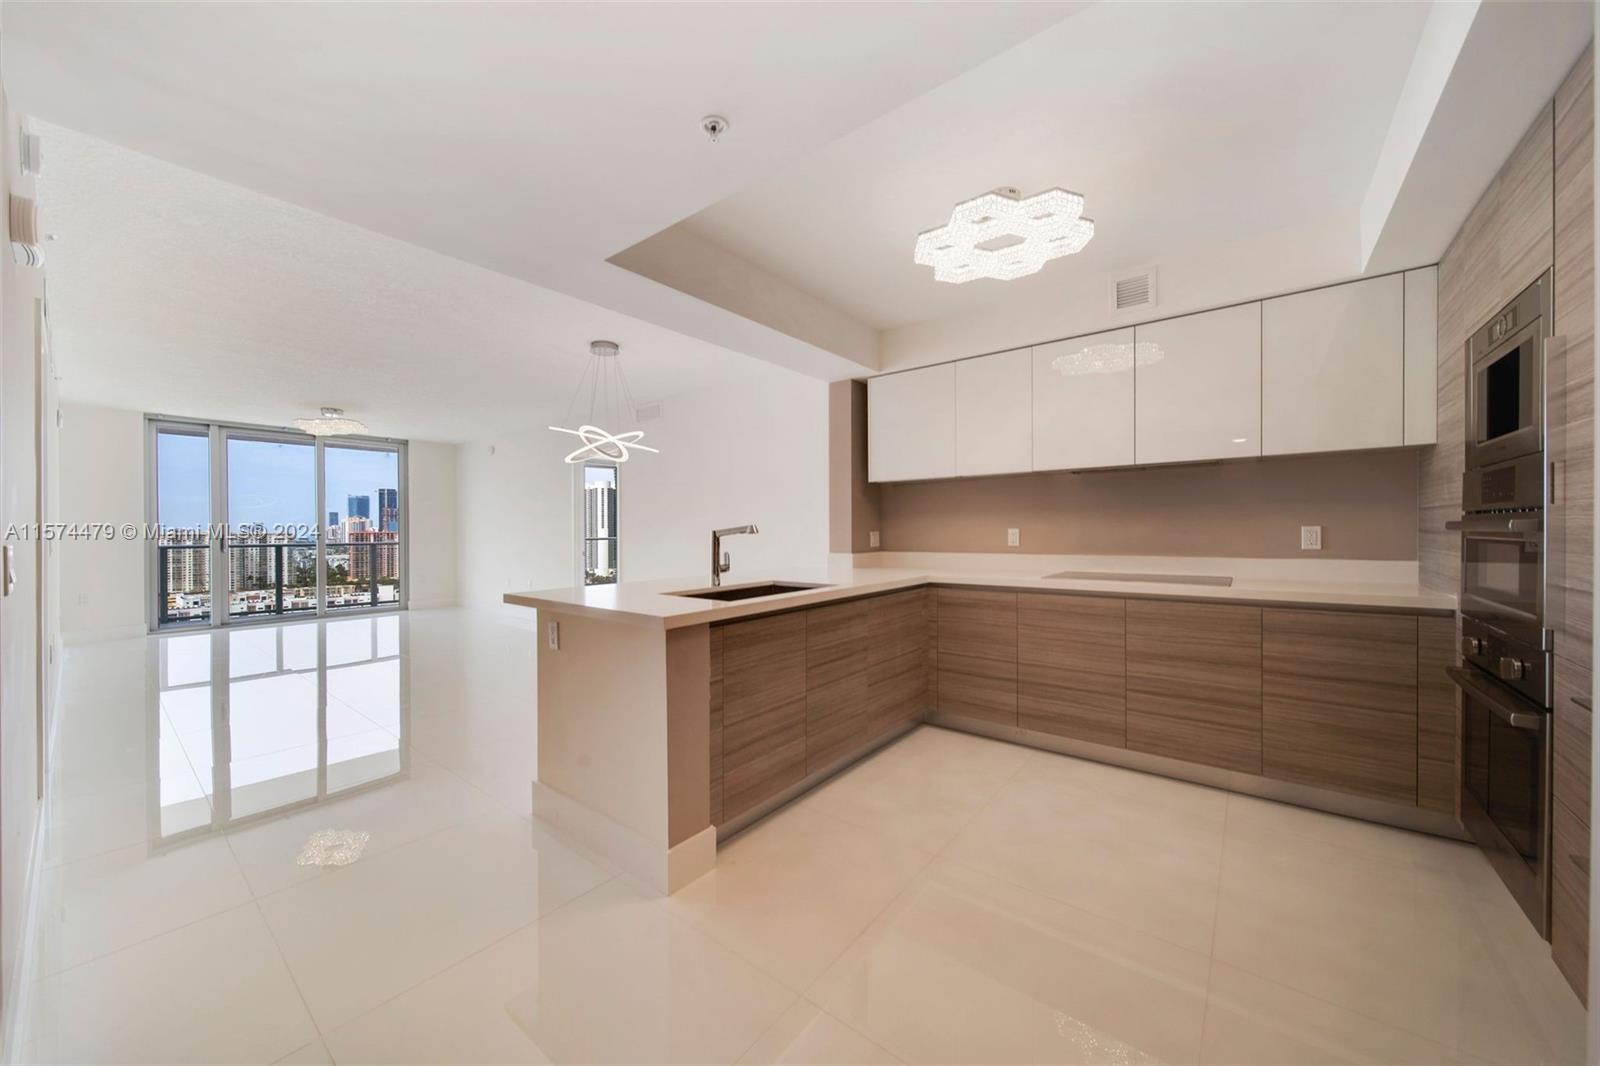 MUST see this 21st floor beautifully appointed 2 bed + Den / 3 bath luxury condo with 1,850 sq. ft. in Parque Towers. Large Den can be used as a 3rd Bedroom, State-of-the-art European high end kitchen appliances. Unobstructed EAST, NORTH & WEST views from 225 sq/ft balcony of the ocean, glamorous Sunny Isles Beach sky line and Intercostal views! Large Master Suite with separate soaking tub and shower. Amenities include: 24 hour lobby services & valet, 5 pools, fitness center, spa, cigar room & wine cellar, Kid's club, guest suites, llounge areas... Close to Aventura and Bal Harbour.